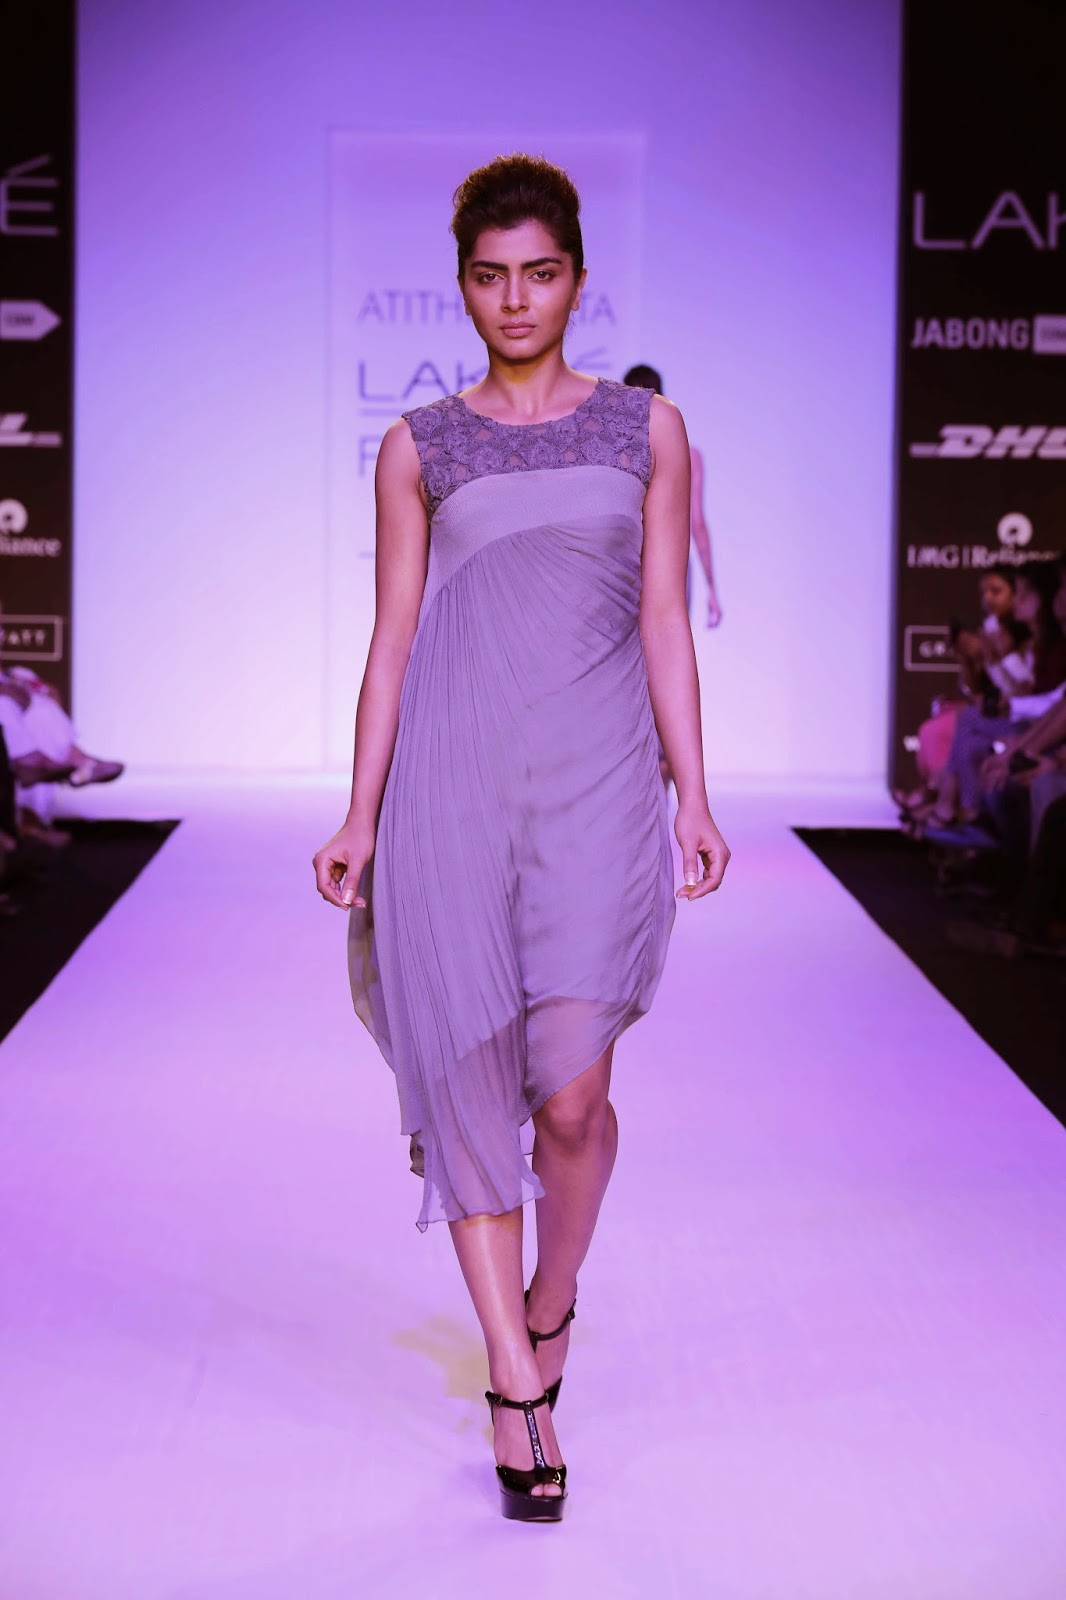 A Quaint Perspective: Lakme' Fashion Week Summer Resort 2014 Day 4 Part 2